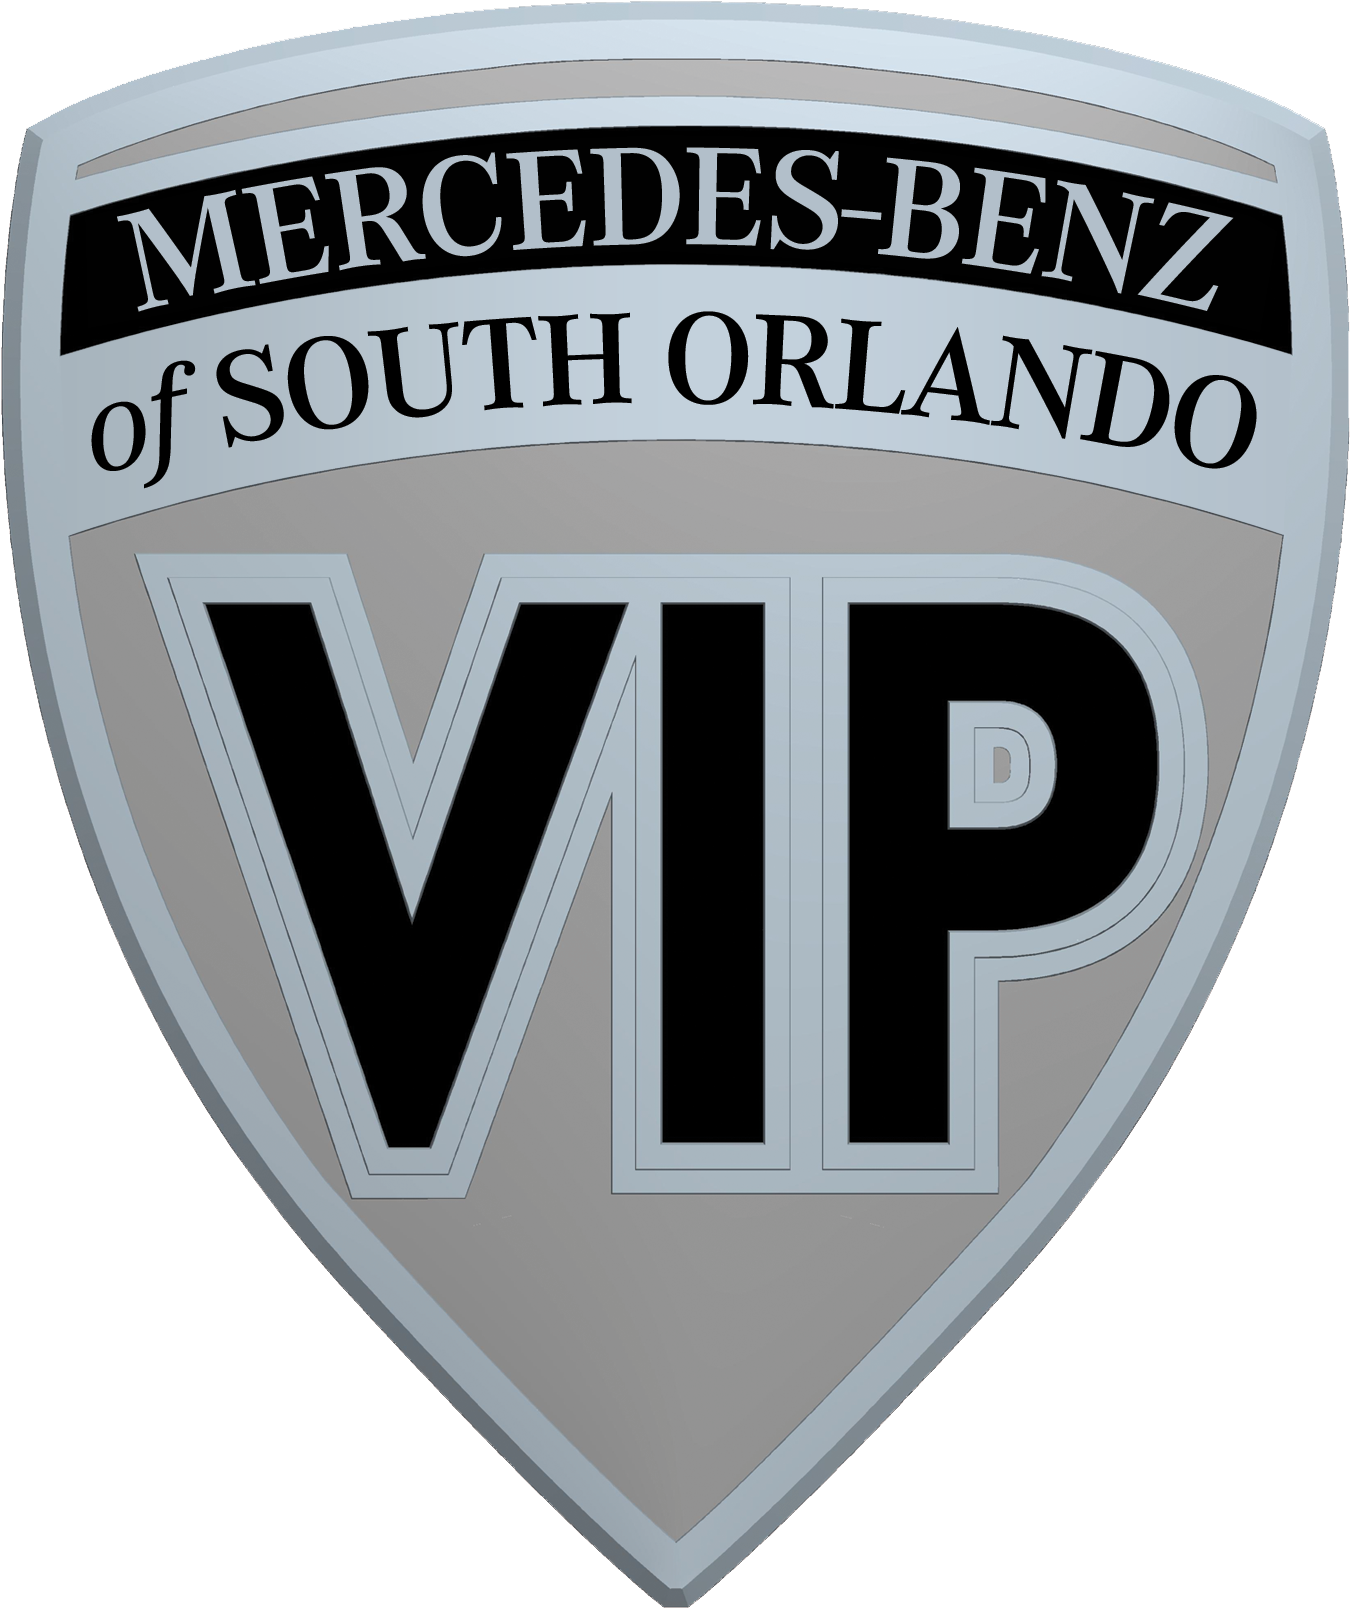 Download Mercedes Benz Of South Orlando Hospitality Pavilion Mercedes Benz Vip Logo Png Image With No Background Pngkey Com